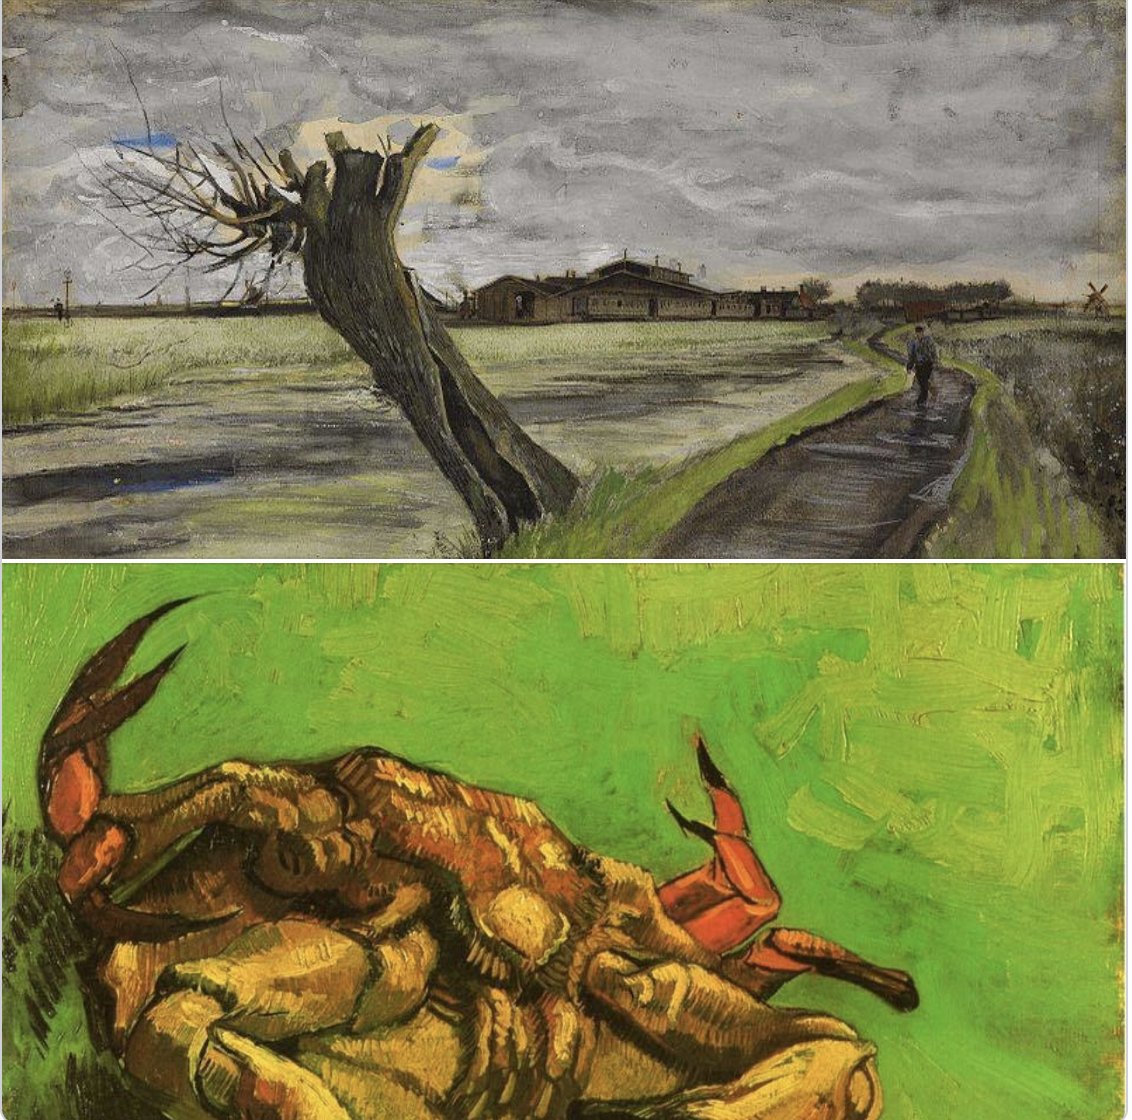 #VanGogh invested a pollard willow and upturned crab with emotion. His empathy for people and things informed his art, letters and life. Vincent said he hoped one day people would say about his work that he: 'felt keenly -- he felt deeply.' #artoftheday #timelessart